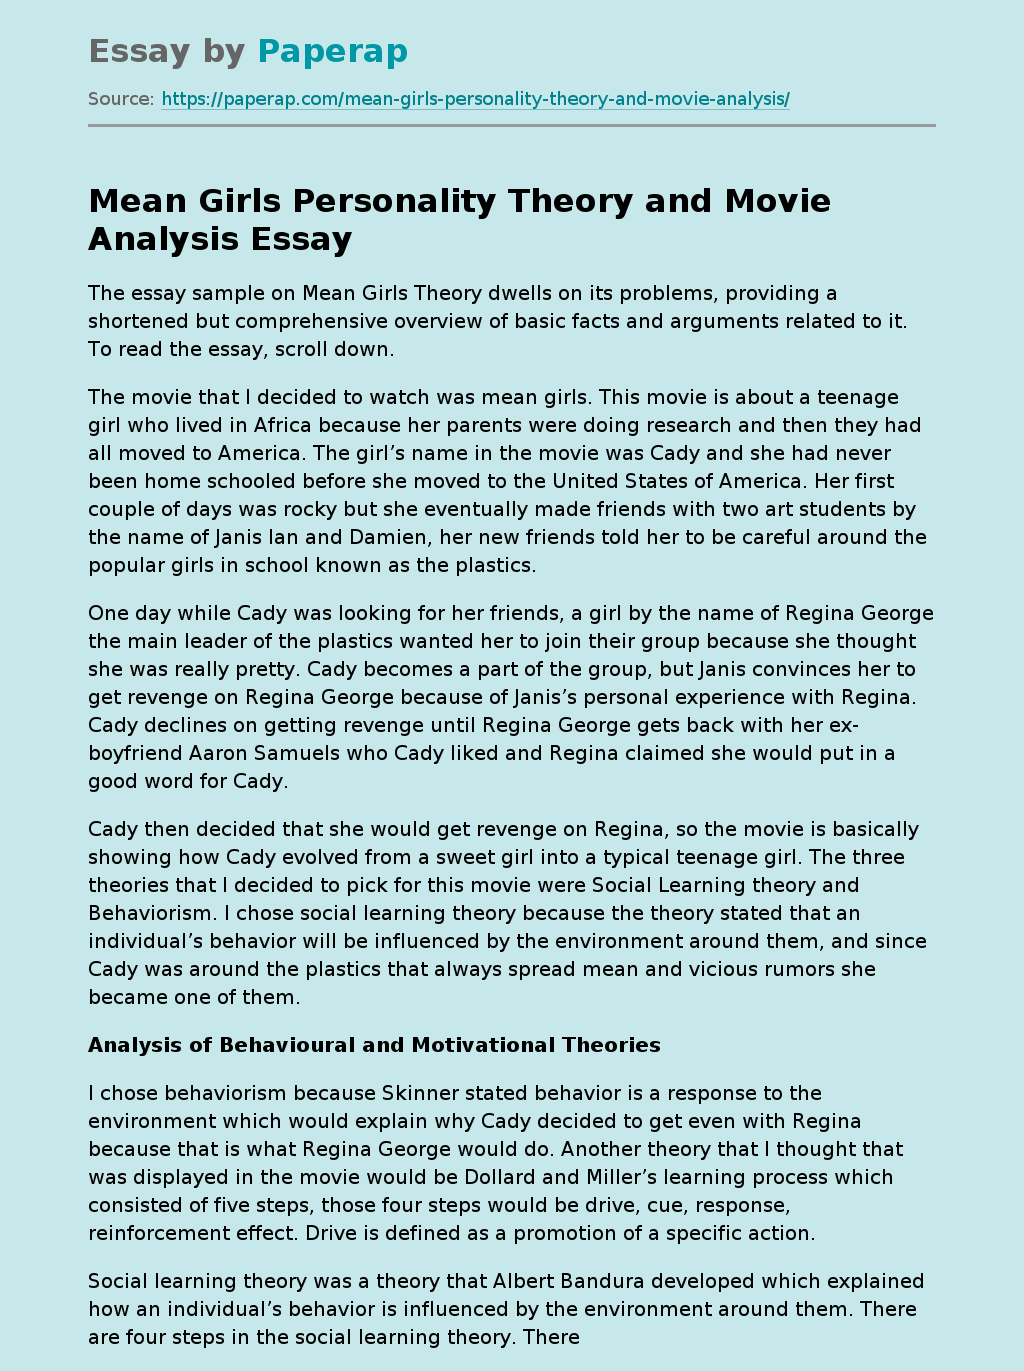 Mean Girls Personality Theory and Movie Analysis